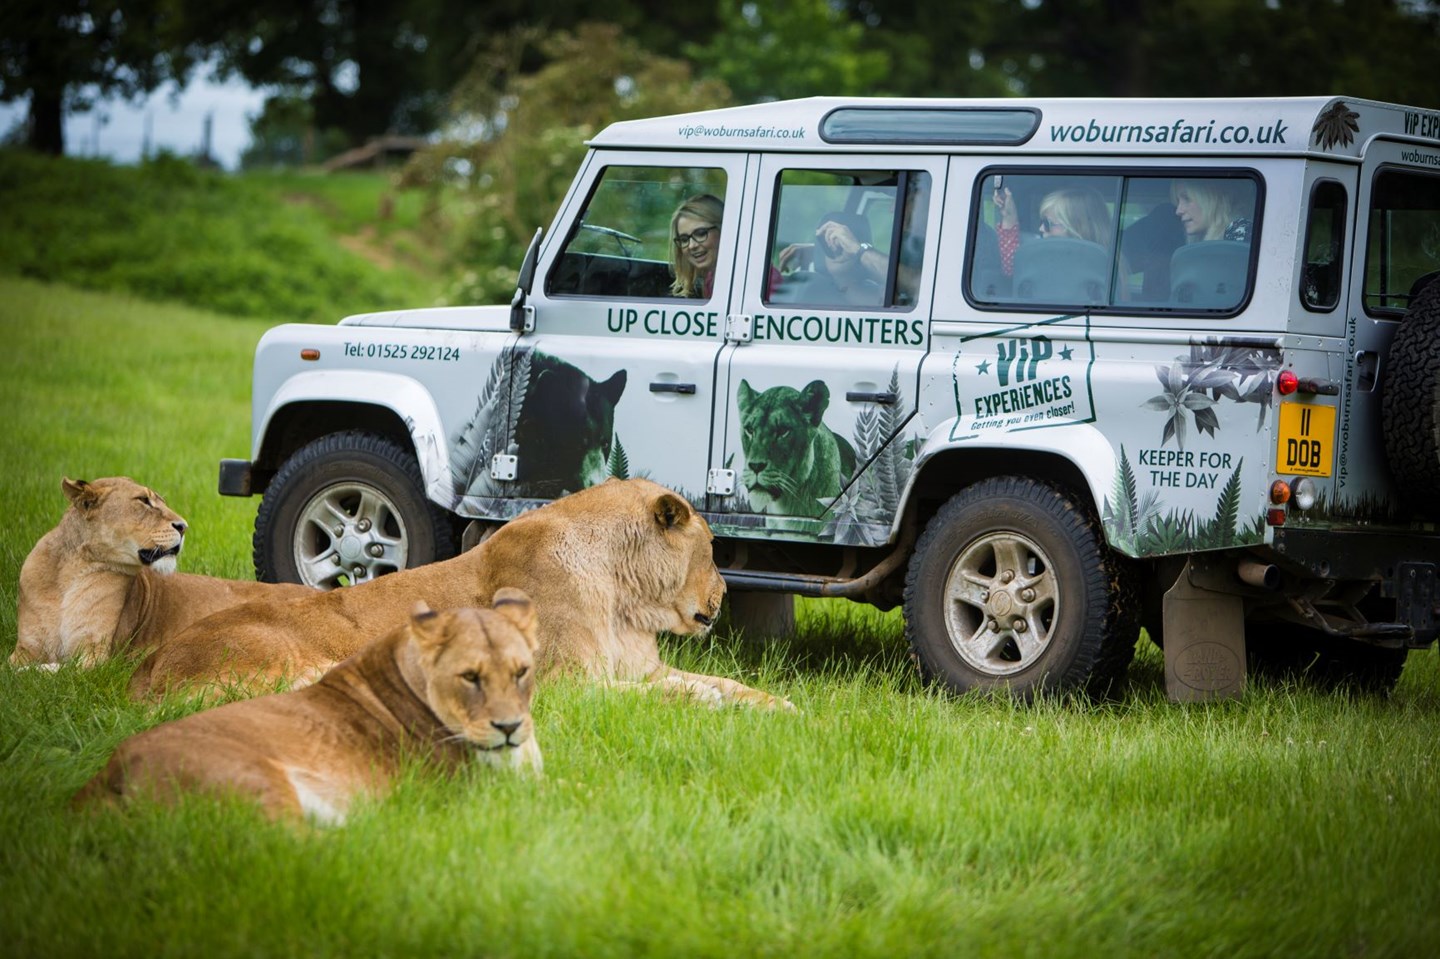 Three African lions relax on grass while guests watch and film excitedly from inside safari VIP truck